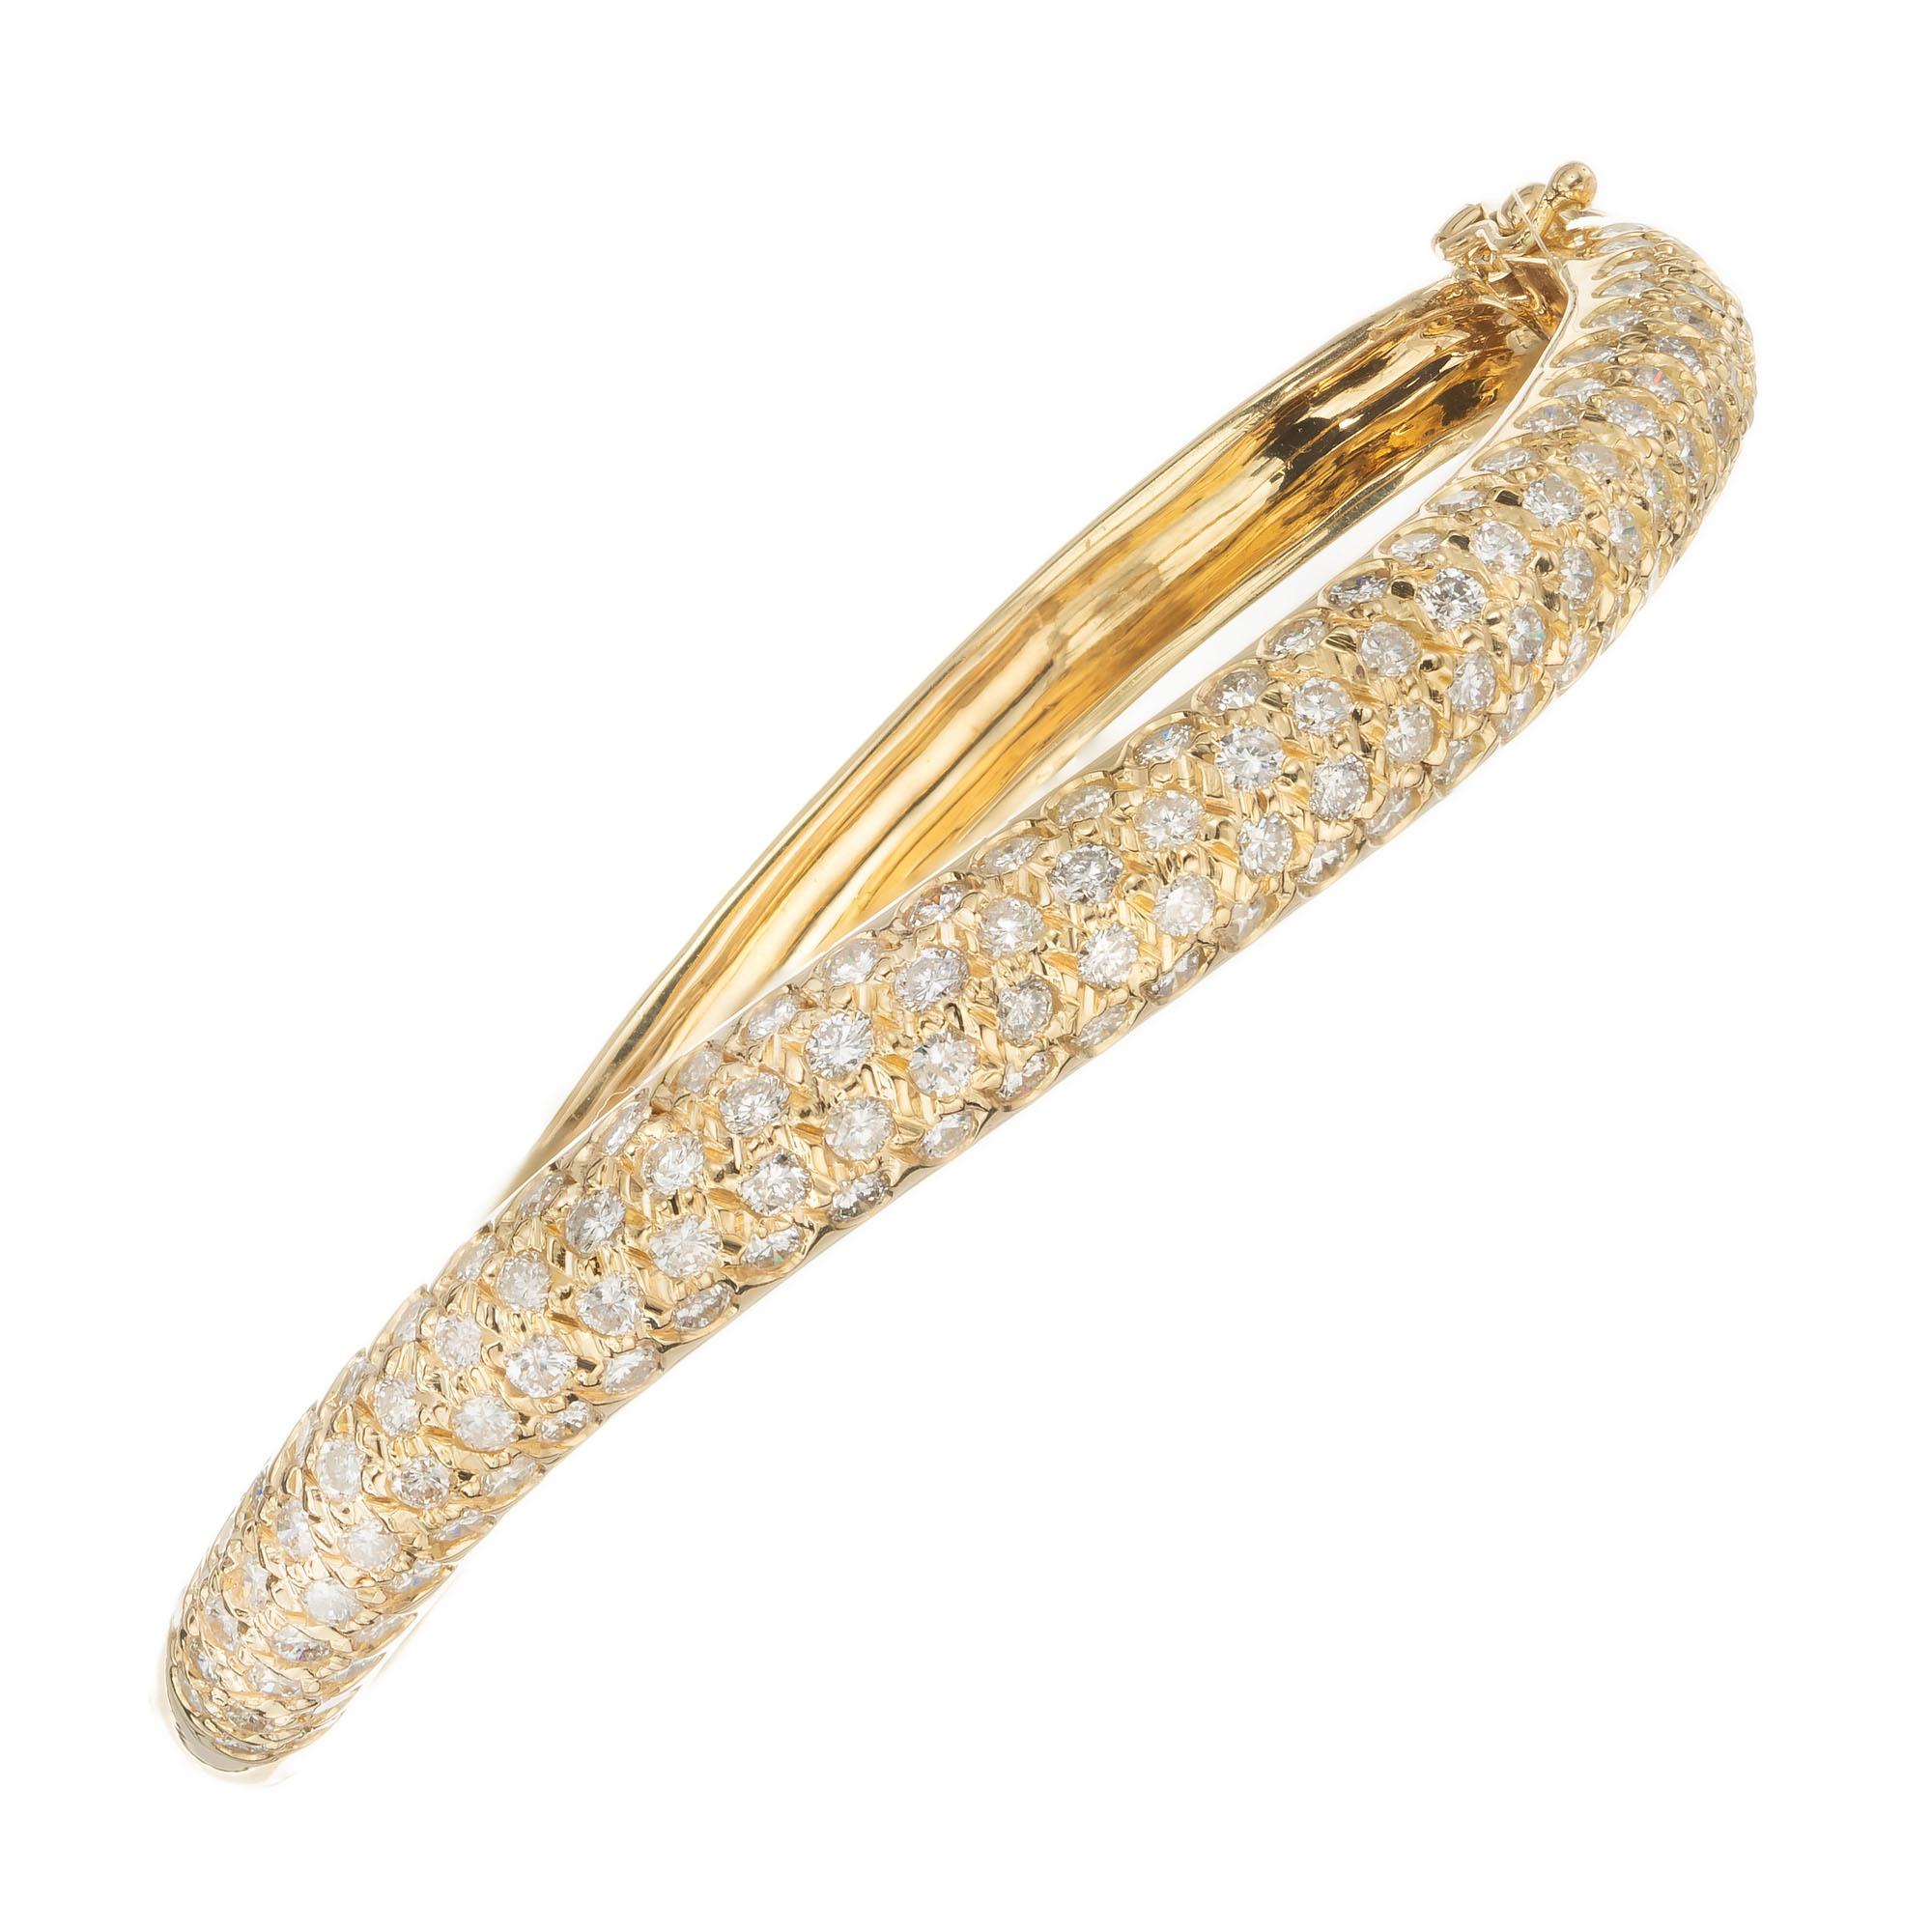 2.00 carat pave set diamond bangle bracelet. 18k yellow gold swirl bangle bracelet with built in catch and two side lock safety. 7-7.5 in length.

128 round brilliant cut diamonds, H-I SI approx. 2.00cts
7-7.5 inches in length
18k yellow gold